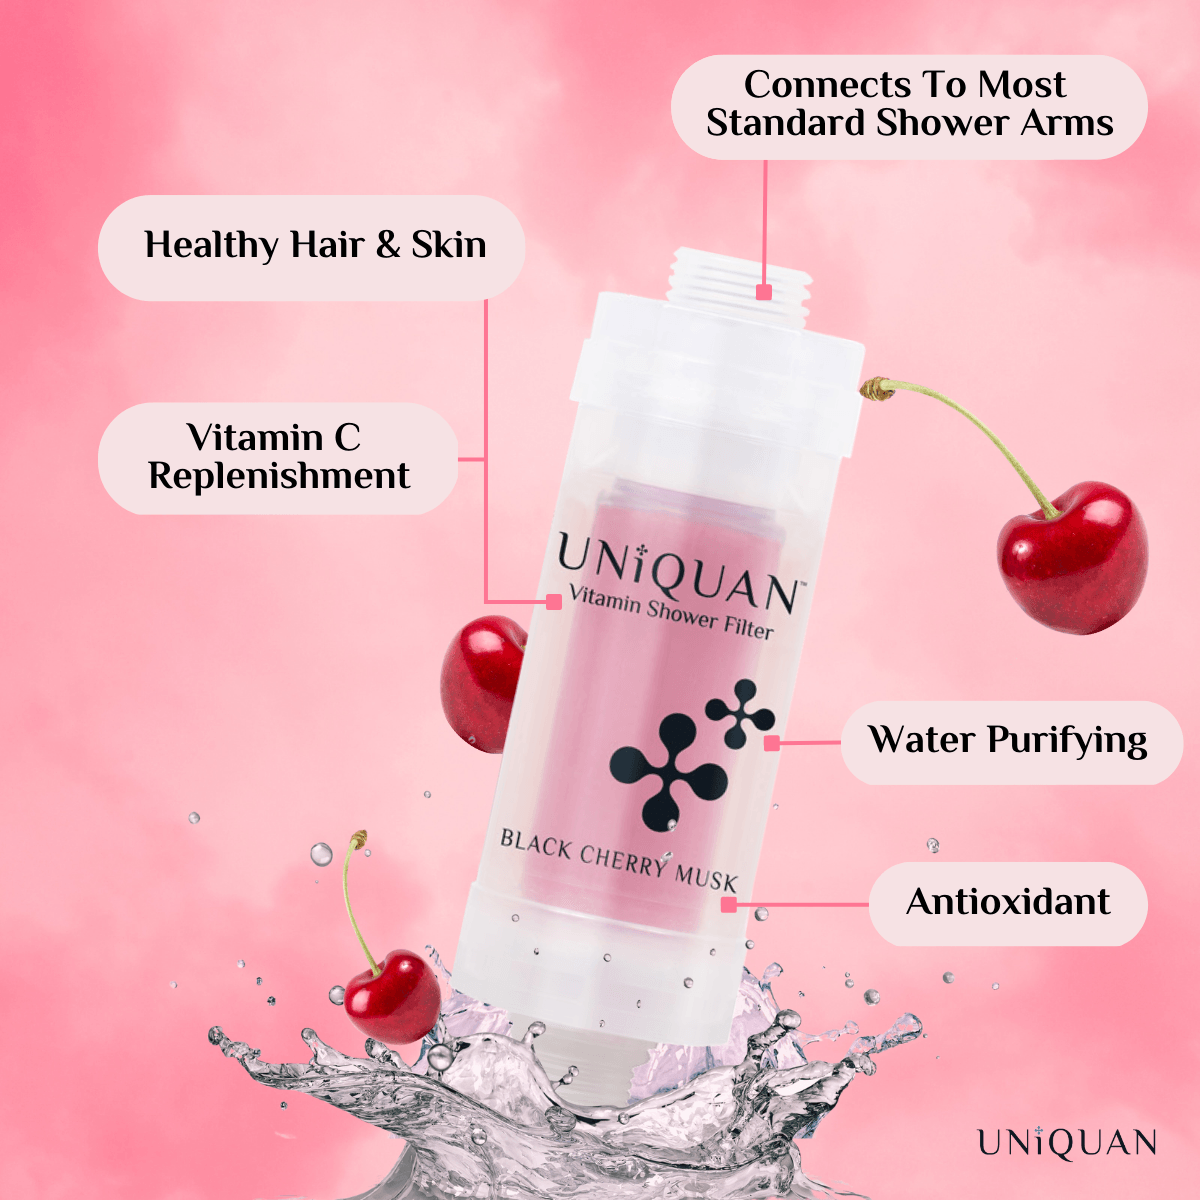 Uniquan Vitamin Shower Filter - Black Cherry Musk - UShops, High-efficiency filter, Relaxation, Stress Relief,